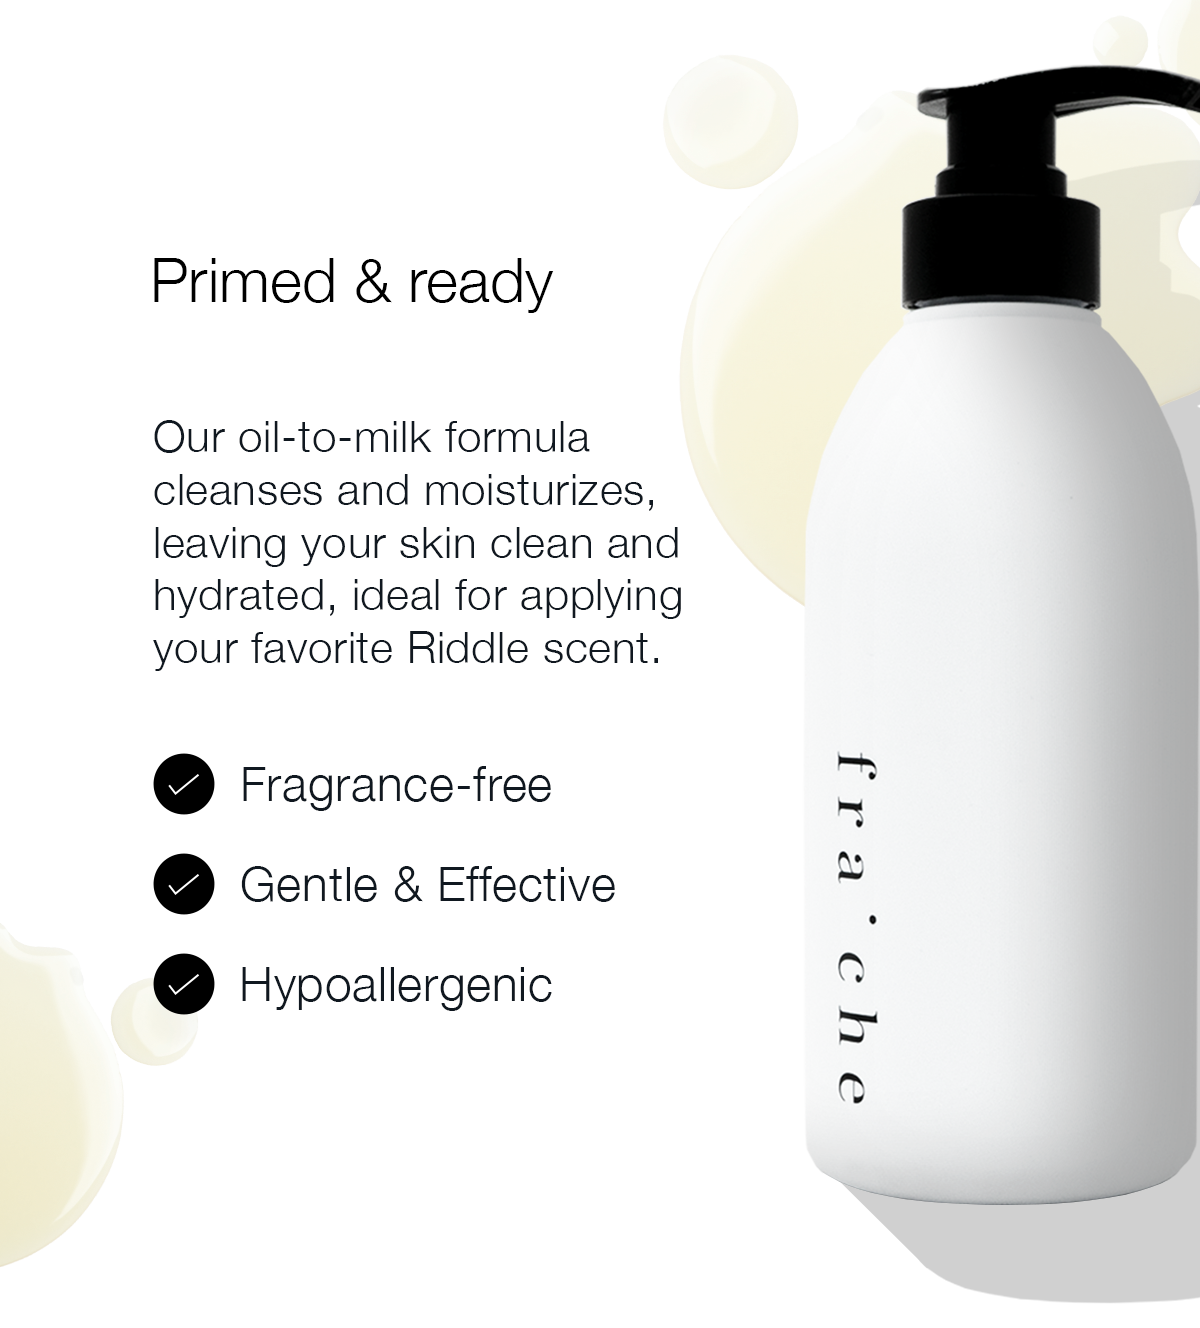 PRIMED & READY Our oil-to-milk formula cleanses and moisturizes, leaving your skin clean and hydrated, ideal for applying your favorite Riddle scent. Fragrance-free Hypoallergenic Gentle & Effective